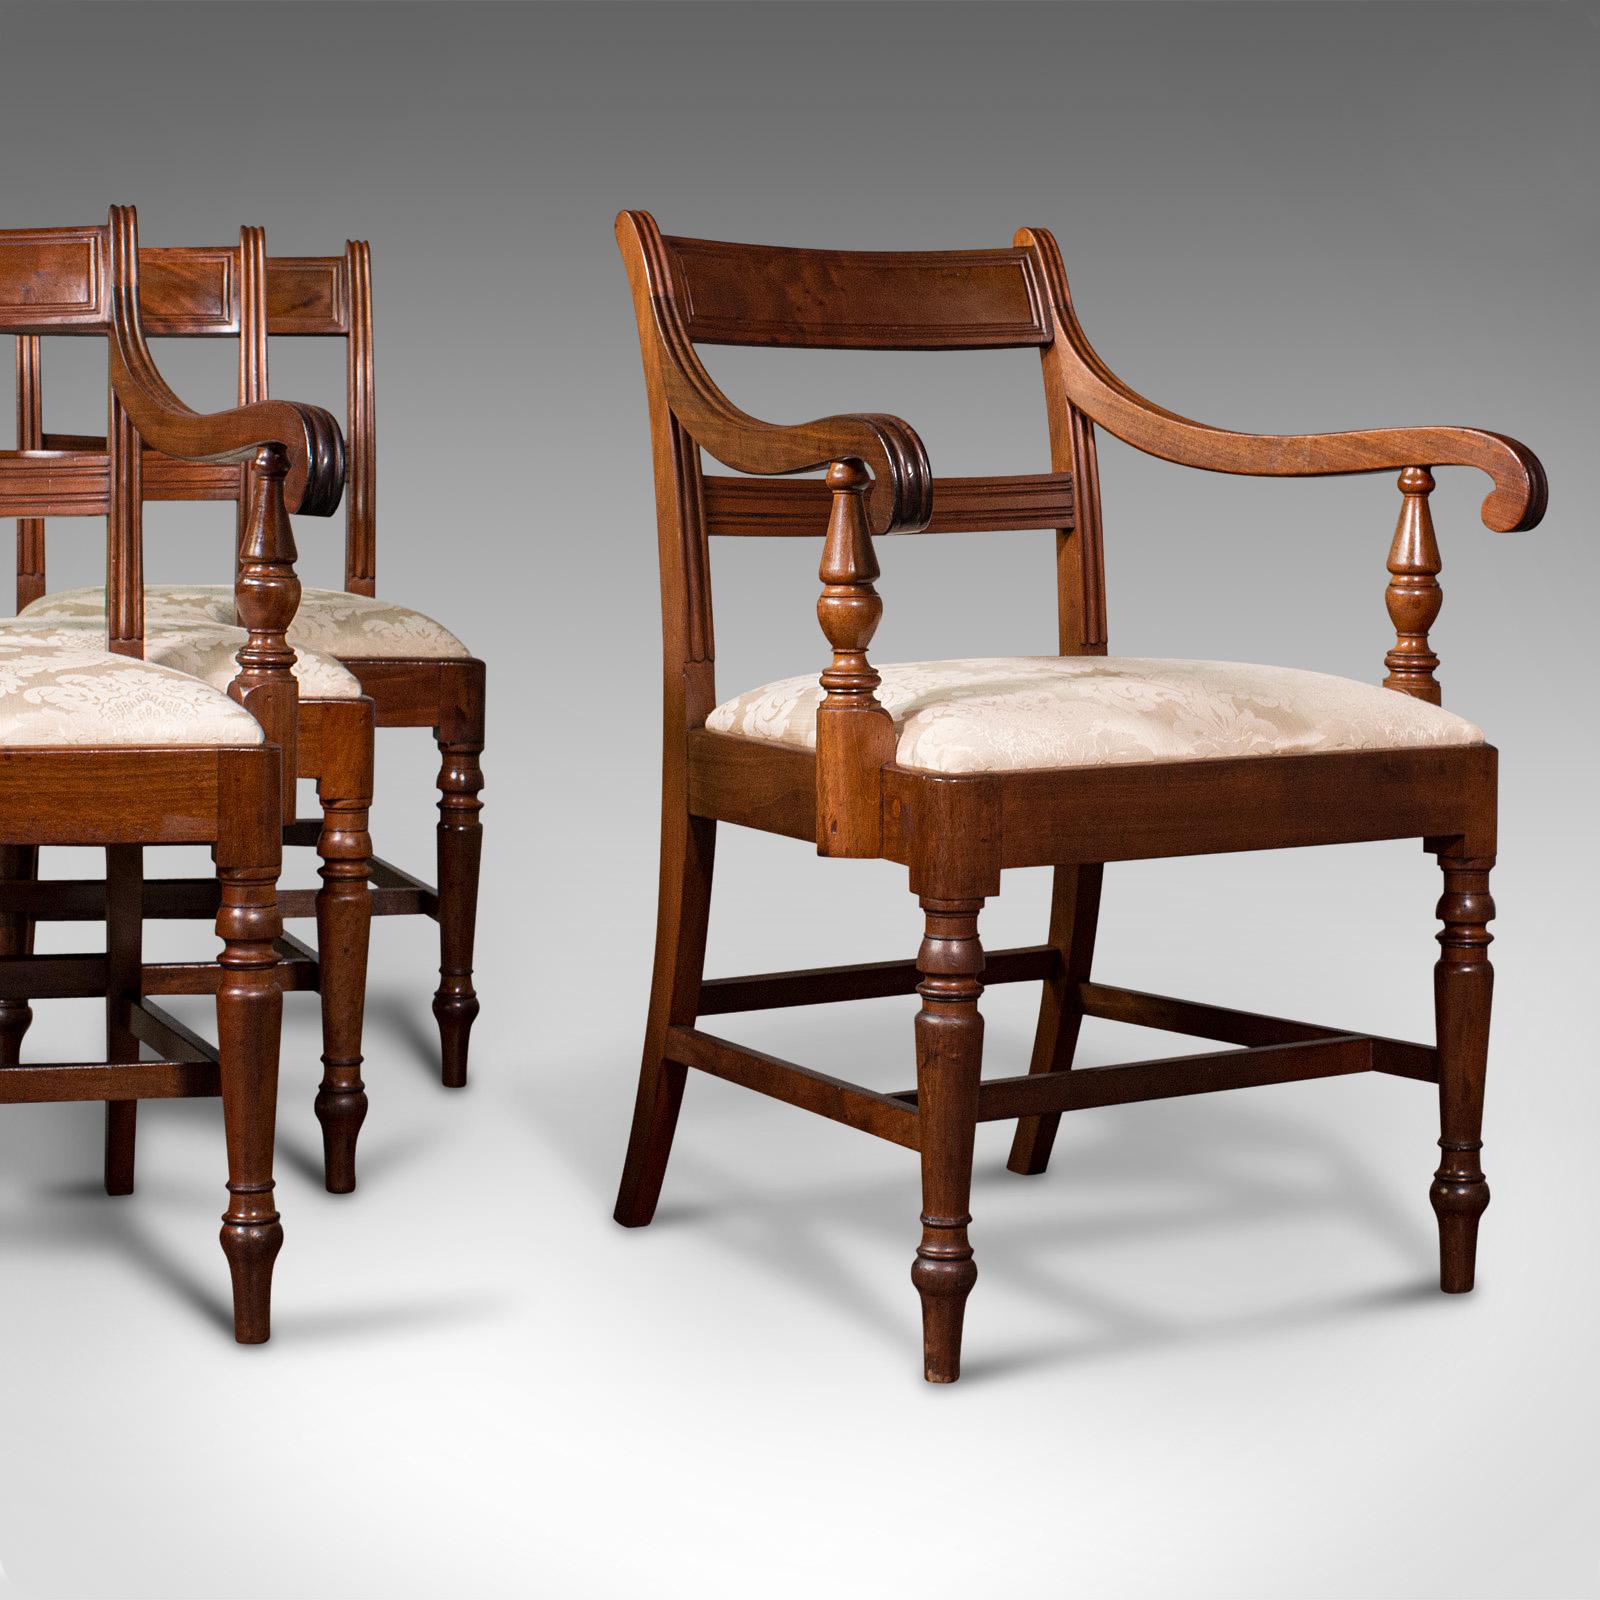 This is a set of four antique dining chairs. An English, mahogany carver and slipper chair suite, dating to the Regency period, circa 1820.

Tasteful Regency craftsmanship and quality upholstery
Displaying a desirable aged patina and in good